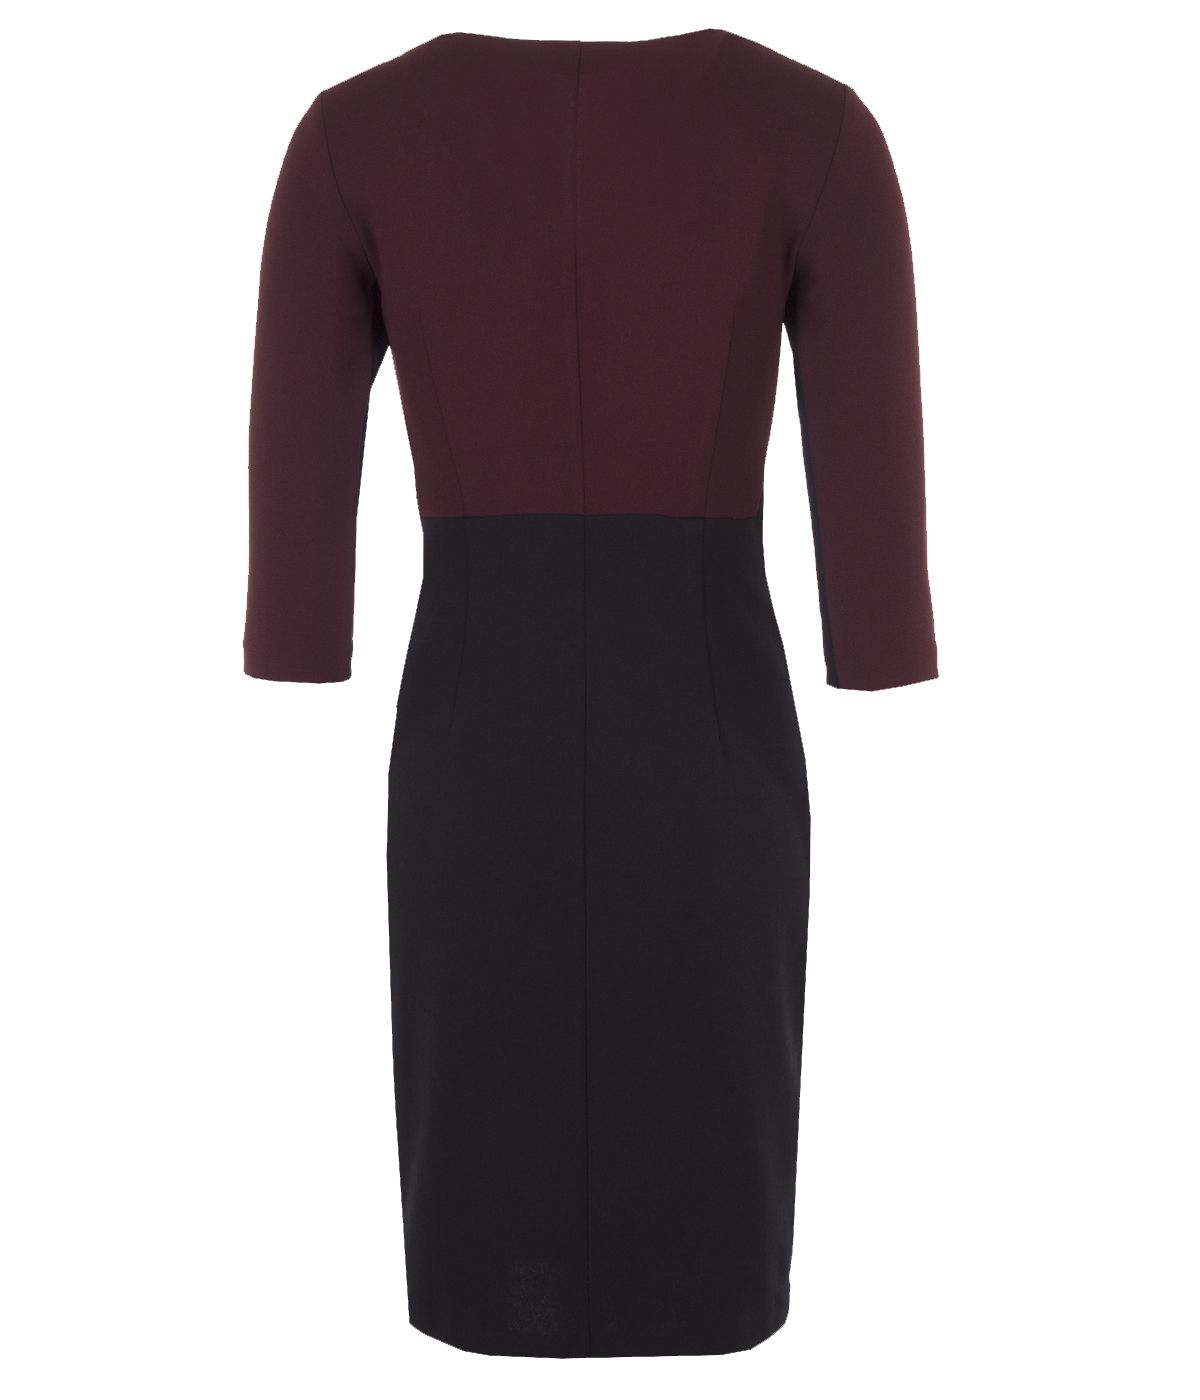 Bodycon dress in two contrasting colors, with V-neck  1